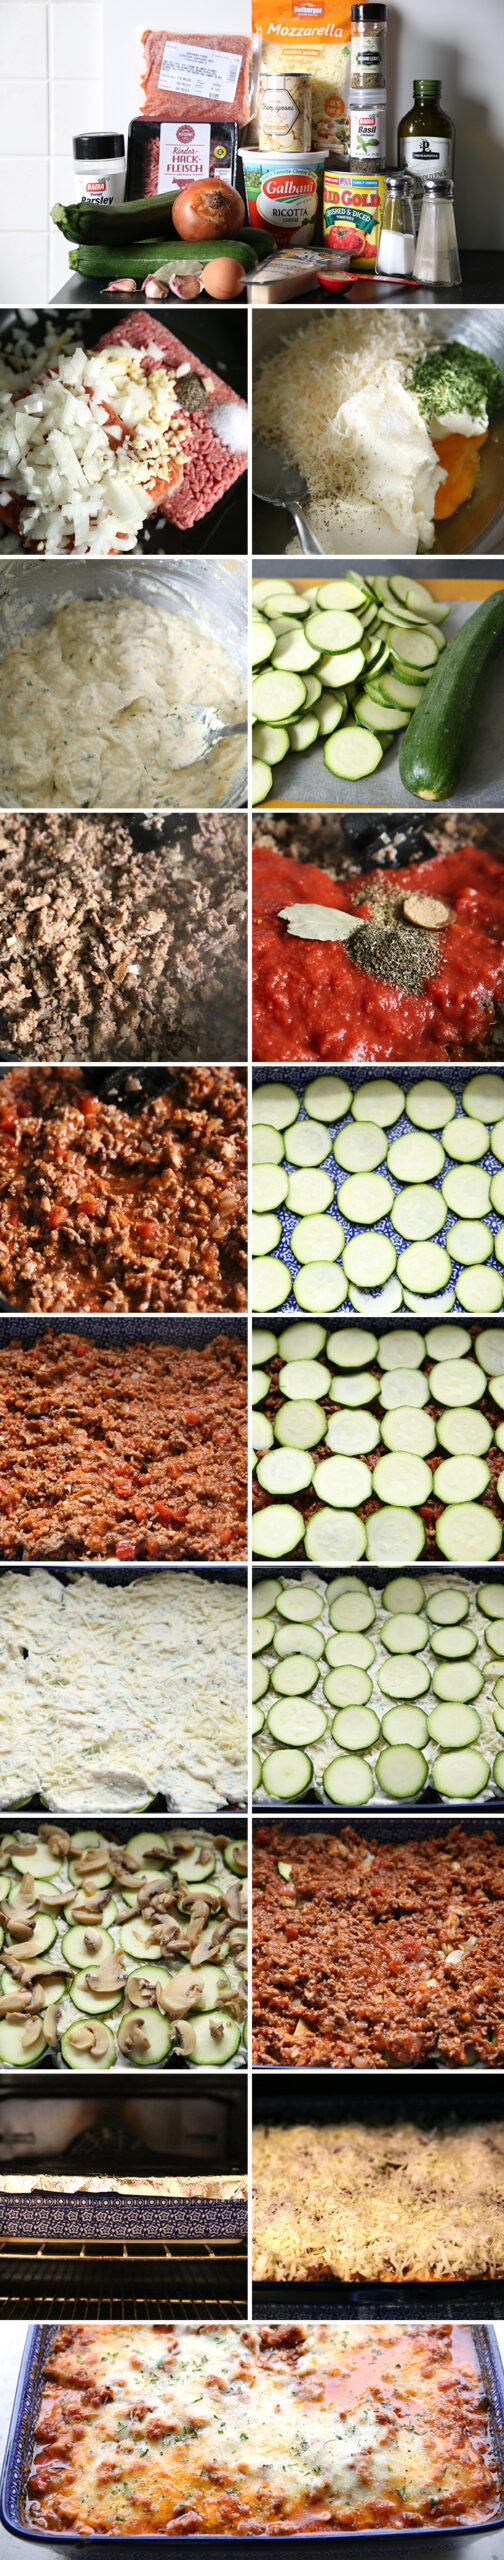 18-picture photo collage of step-by-step pictures for making No-Noodle Lasagna.